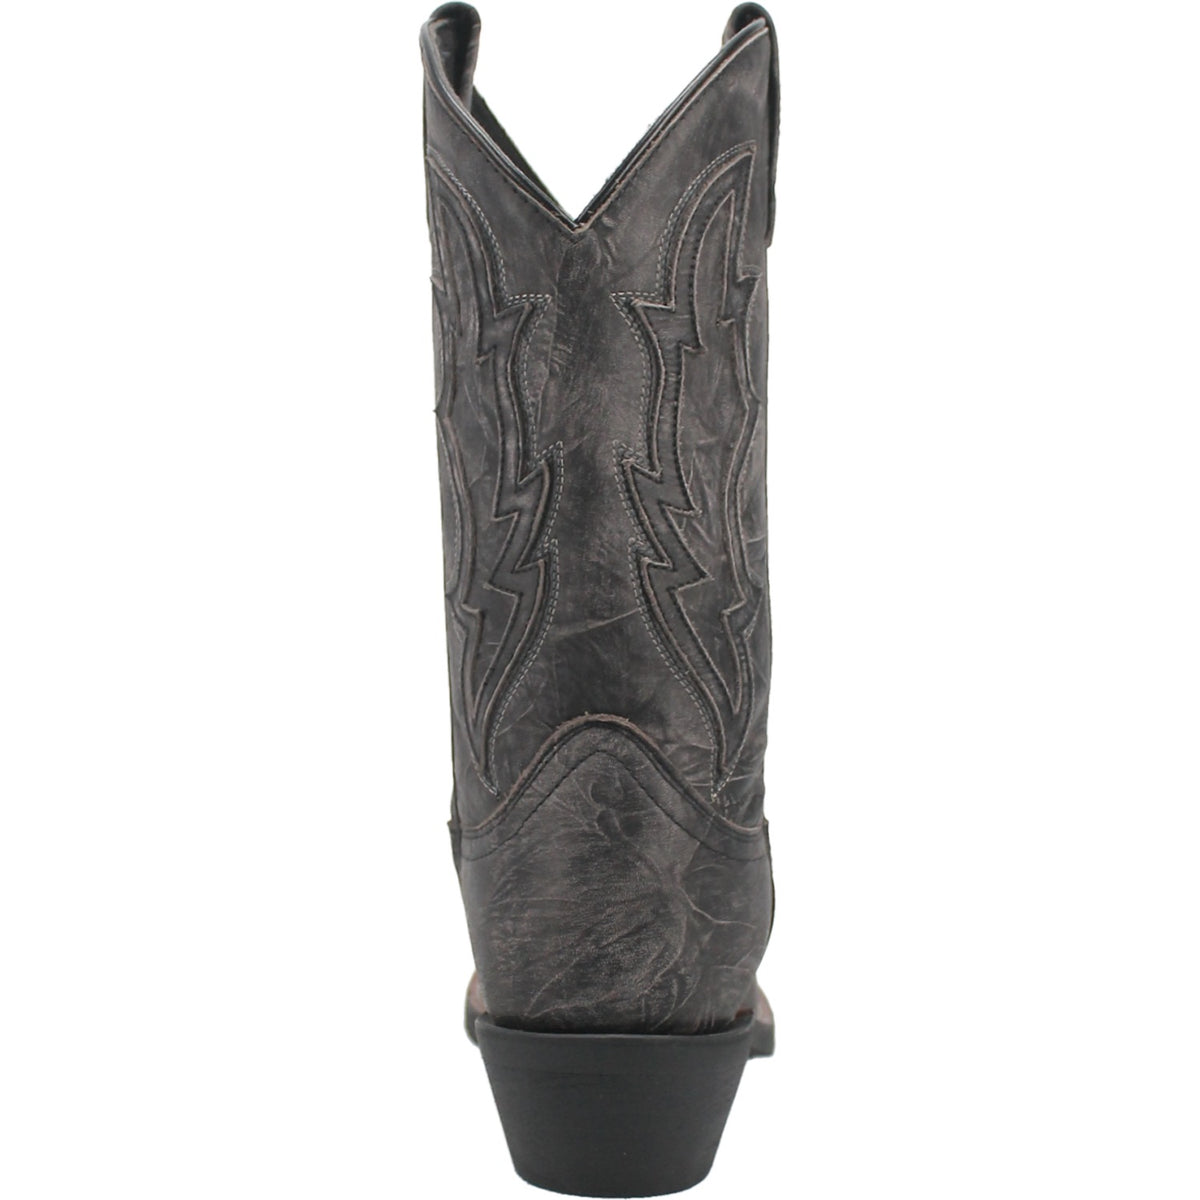 JESSCO LEATHER BOOT Cover